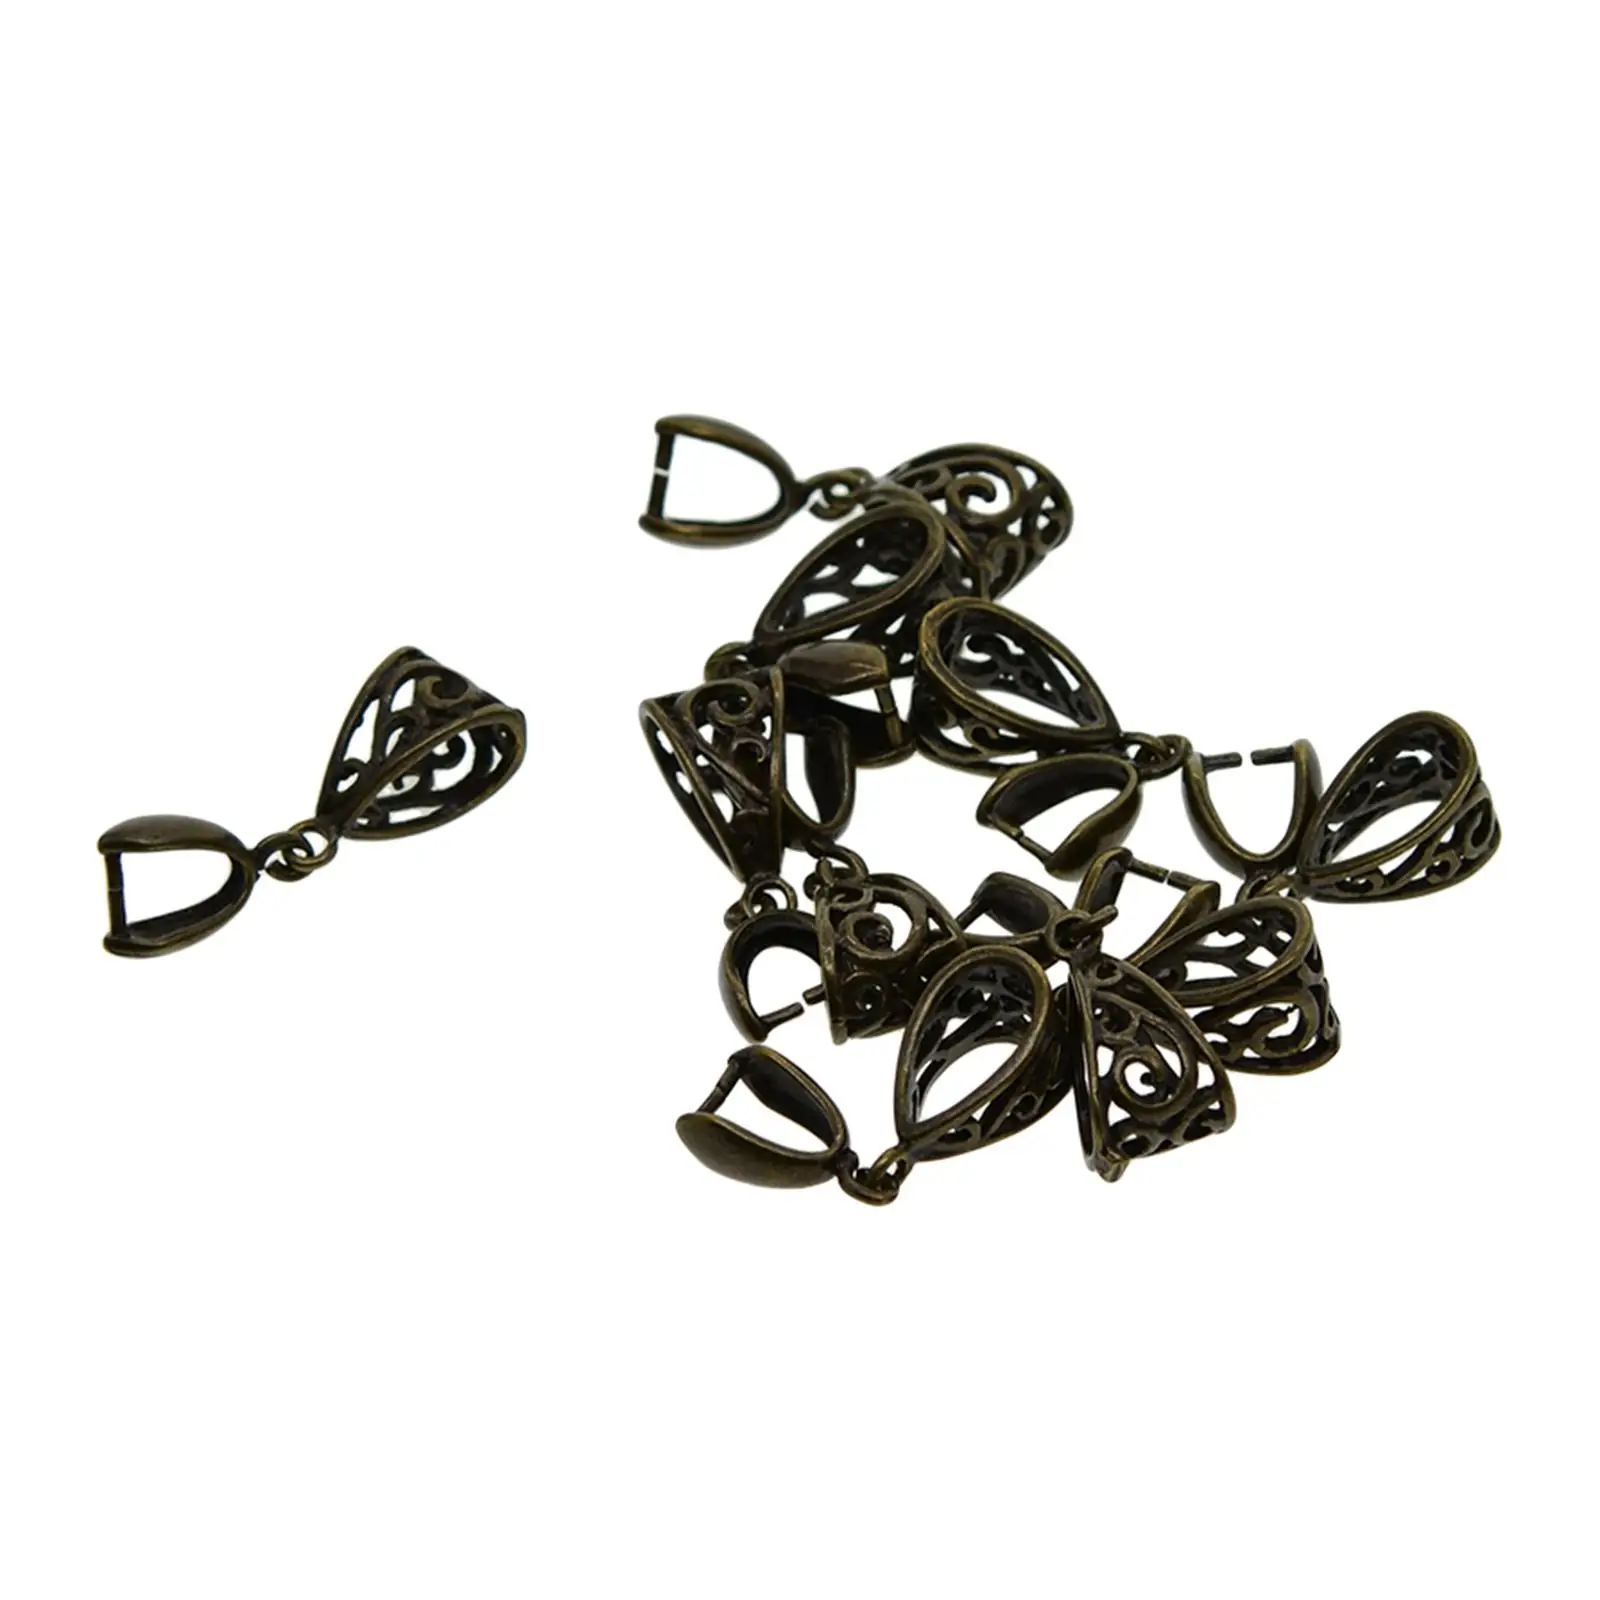 10x Bronze Pinch Bails Beads Hanger  Clasps for Jewelry Making Buckles Charms Holder Necklace Bracelet Supplies